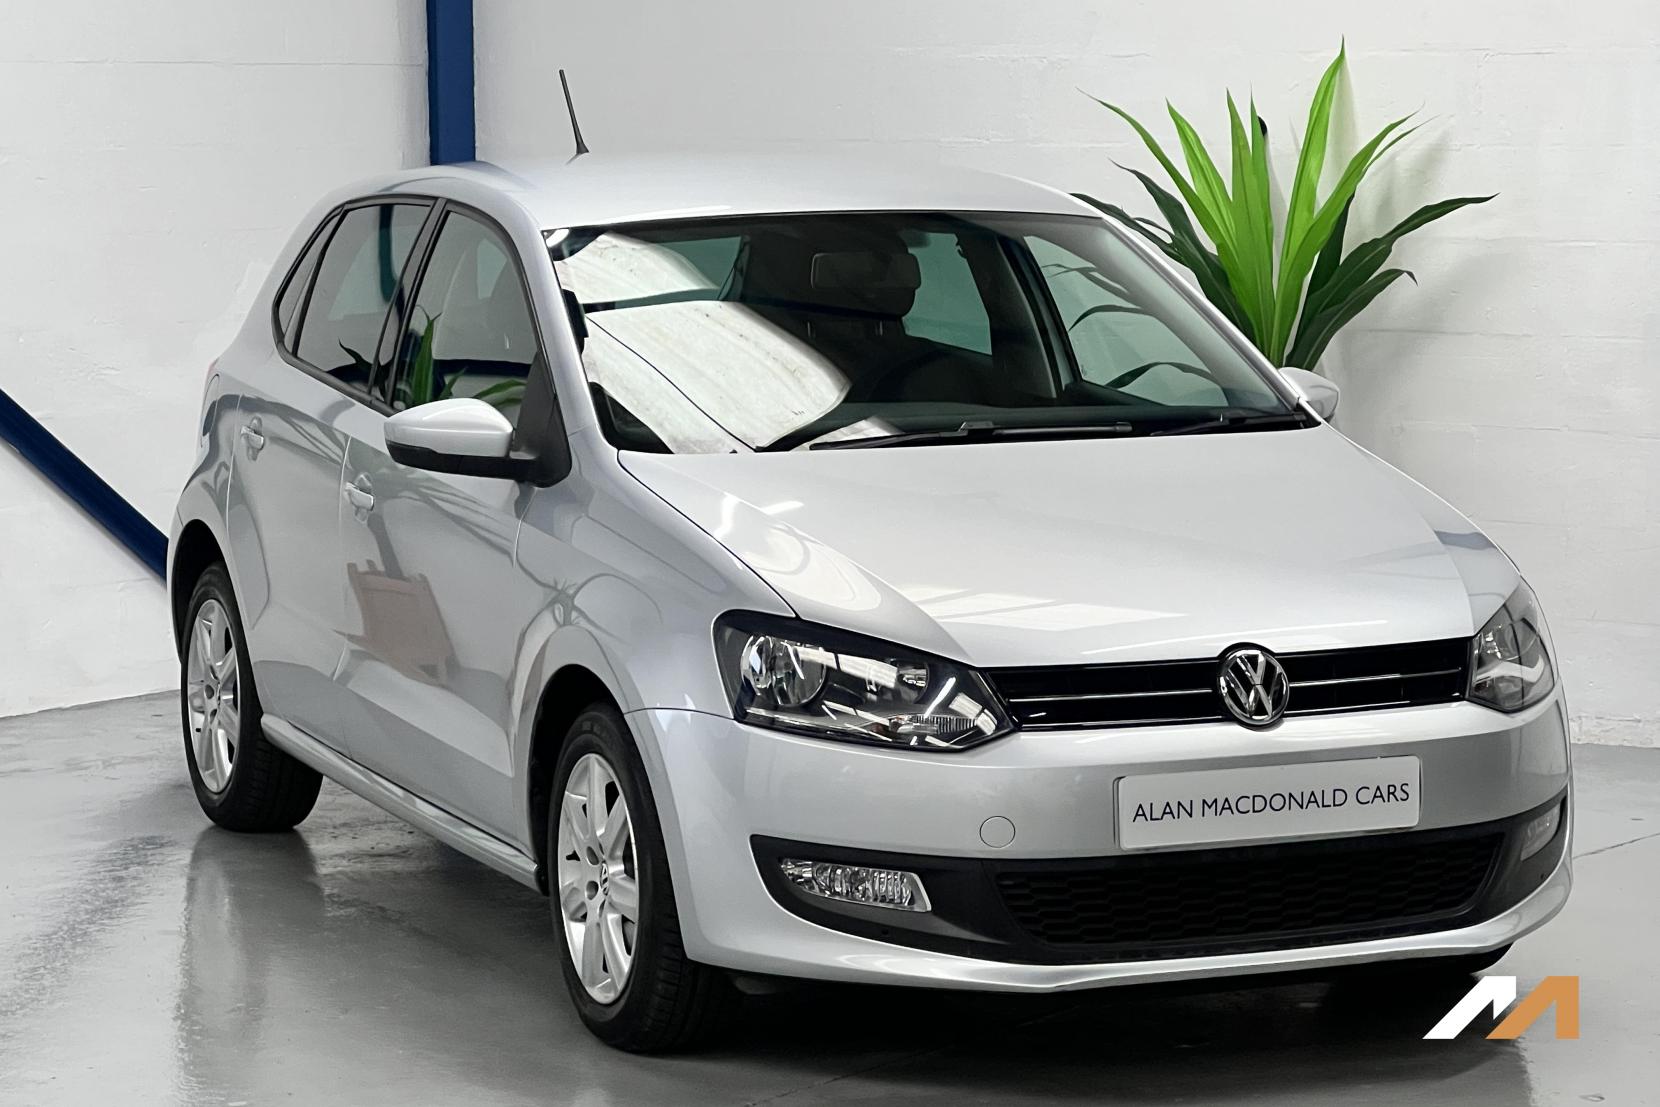 Volkswagen Polo 1.2 Match Edition Hatchback 5dr Petrol Manual Euro 5 (60 ps)